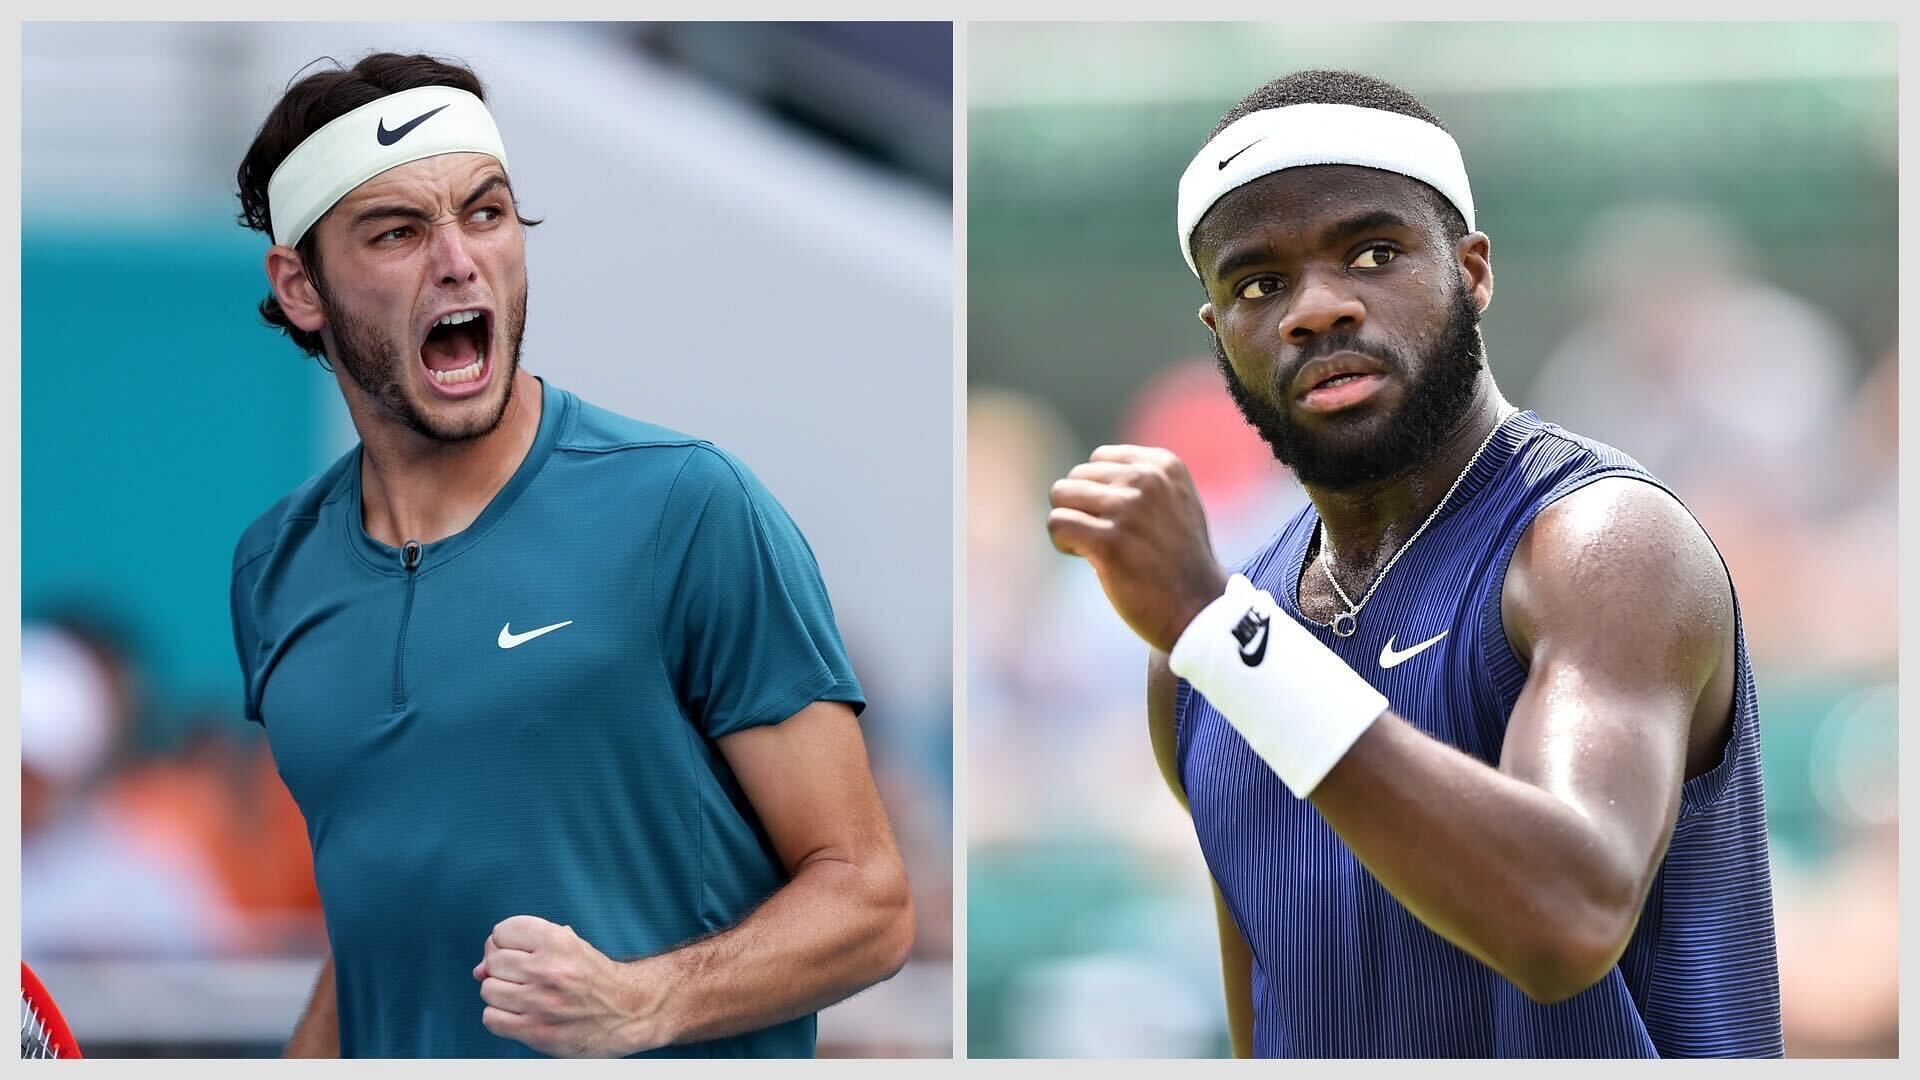 Taylor Fritz and Frances Tiafoe are the two highest-ranked American players 